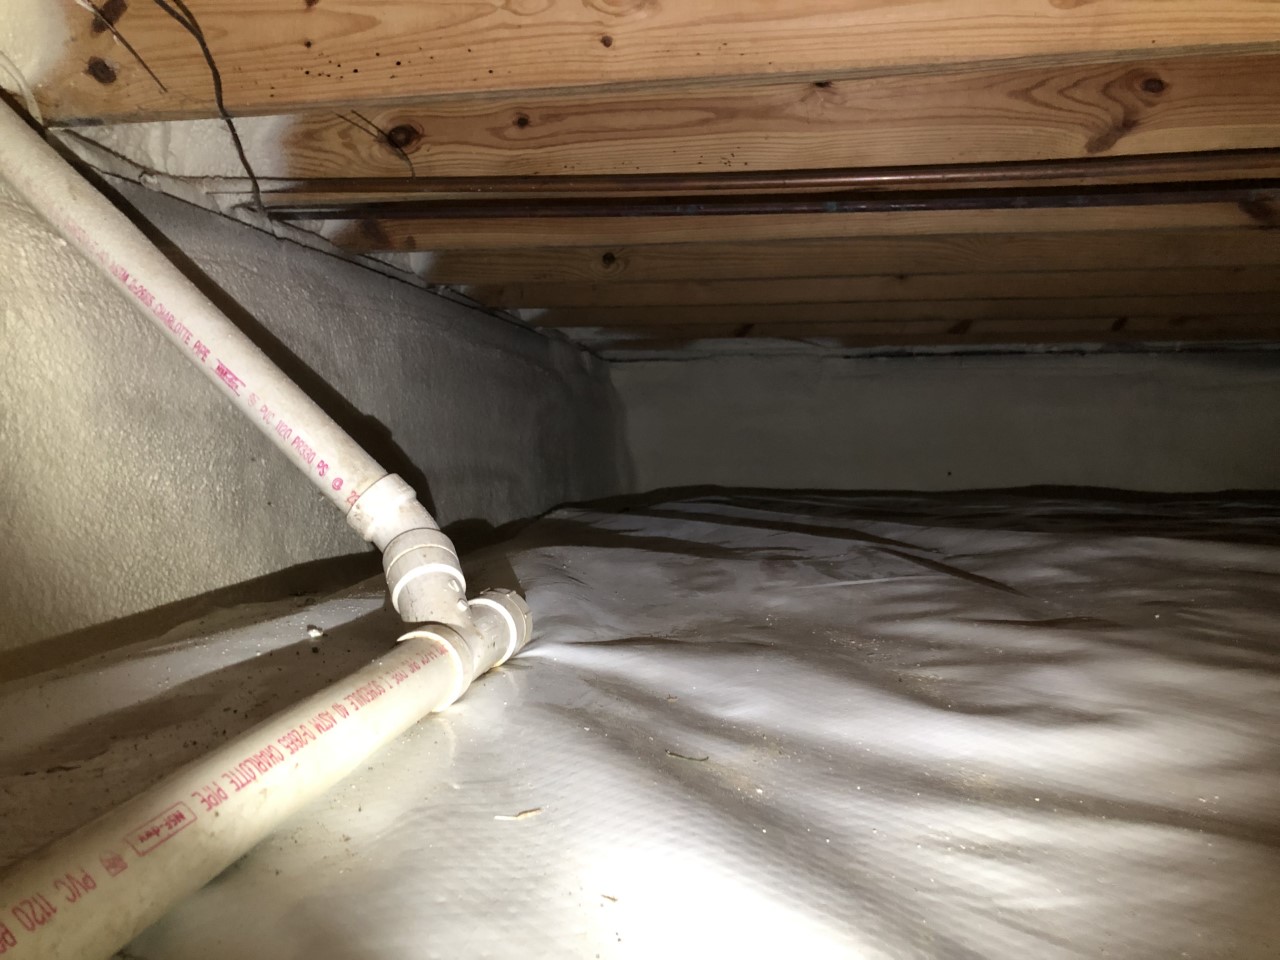 Crawl space insulation underneath of a residential home